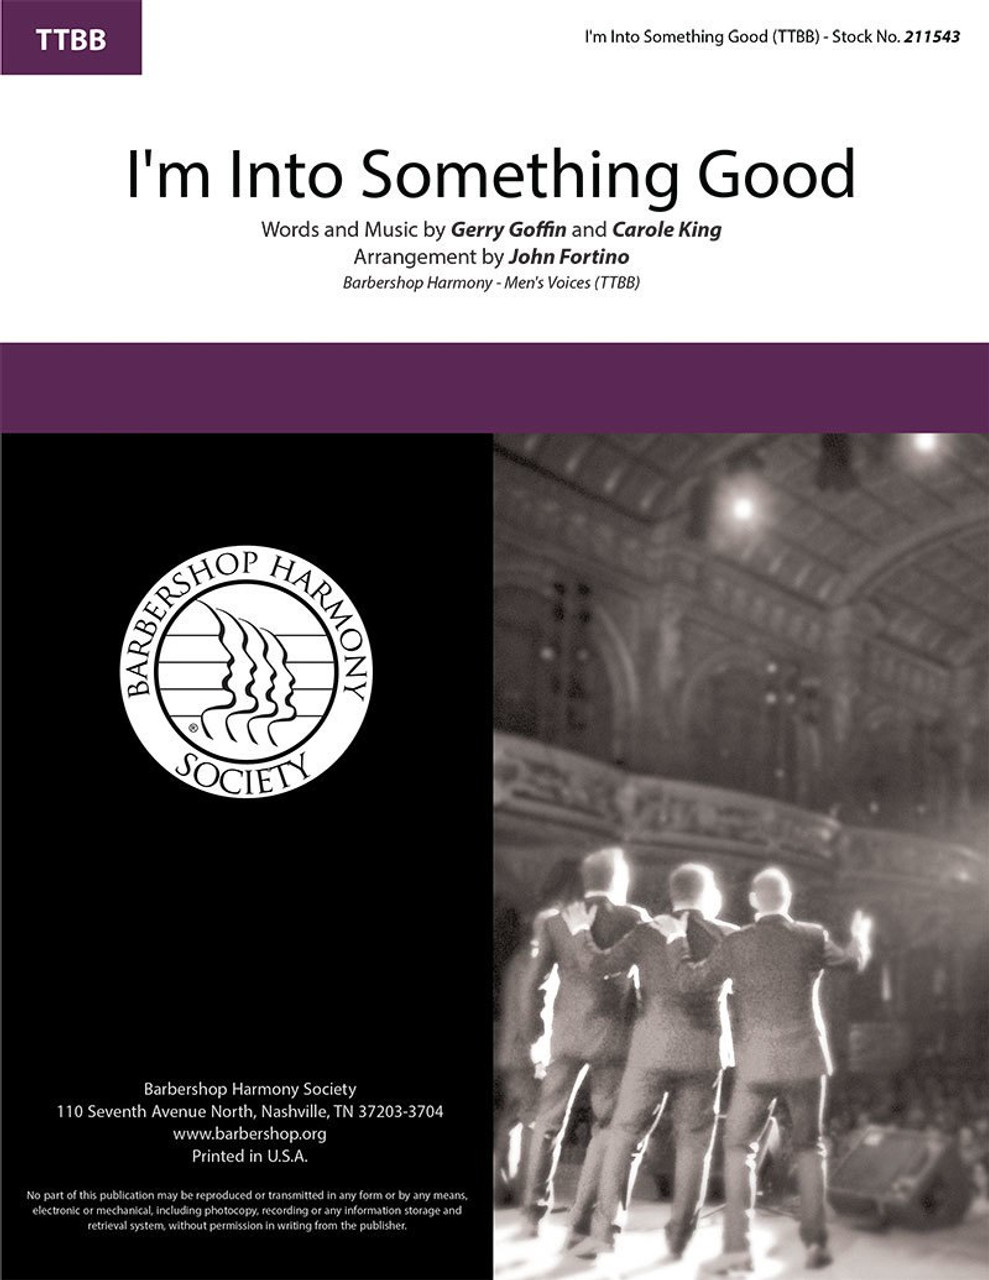 I'm Into Something Good (TTBB) (arr. Fortino) - Download